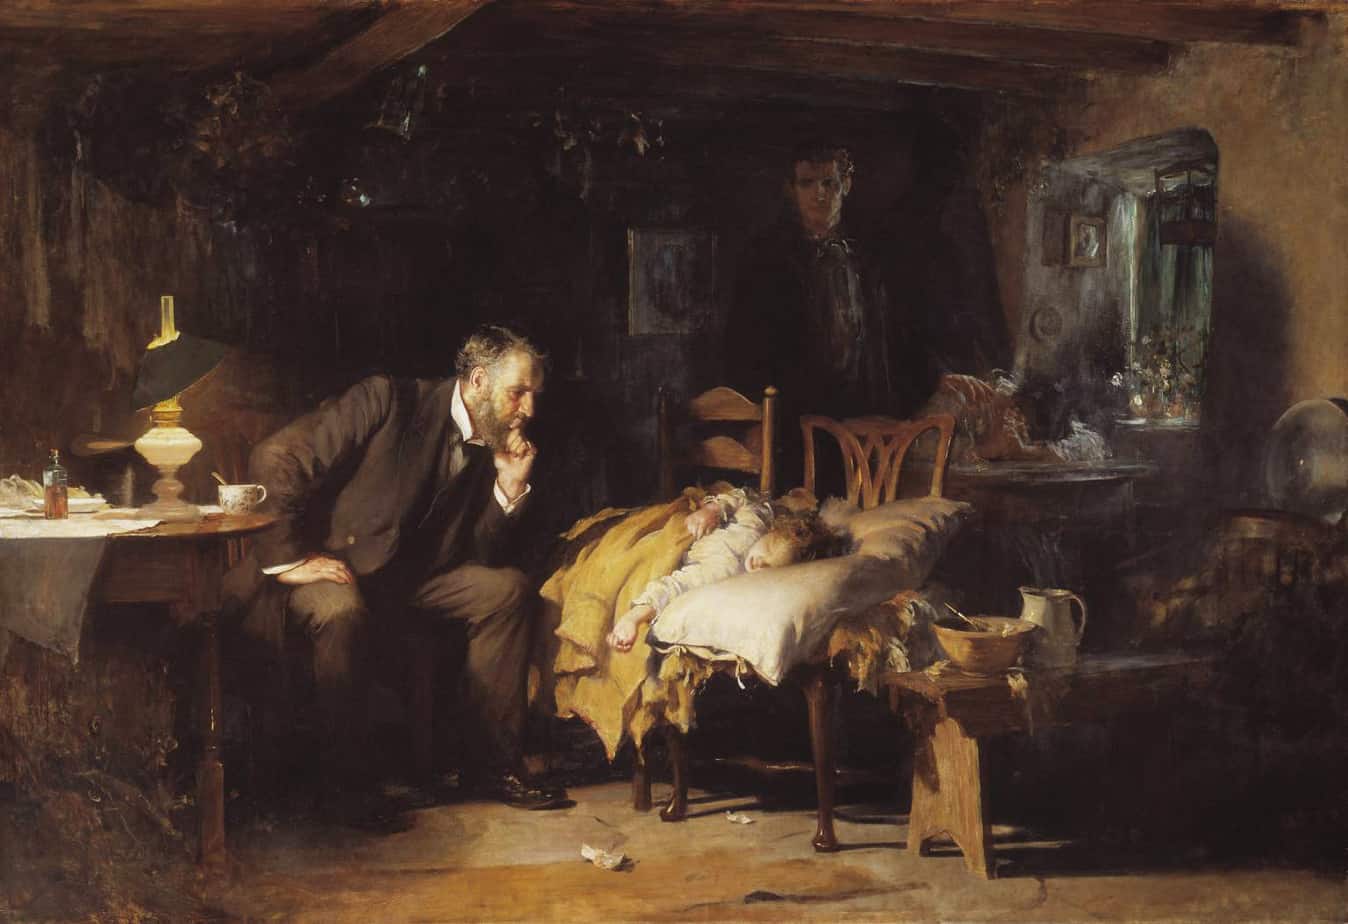 The Doctor exhibited 1891 Sir Luke Fildes 1843-1927 Presented by Sir Henry Tate 1894